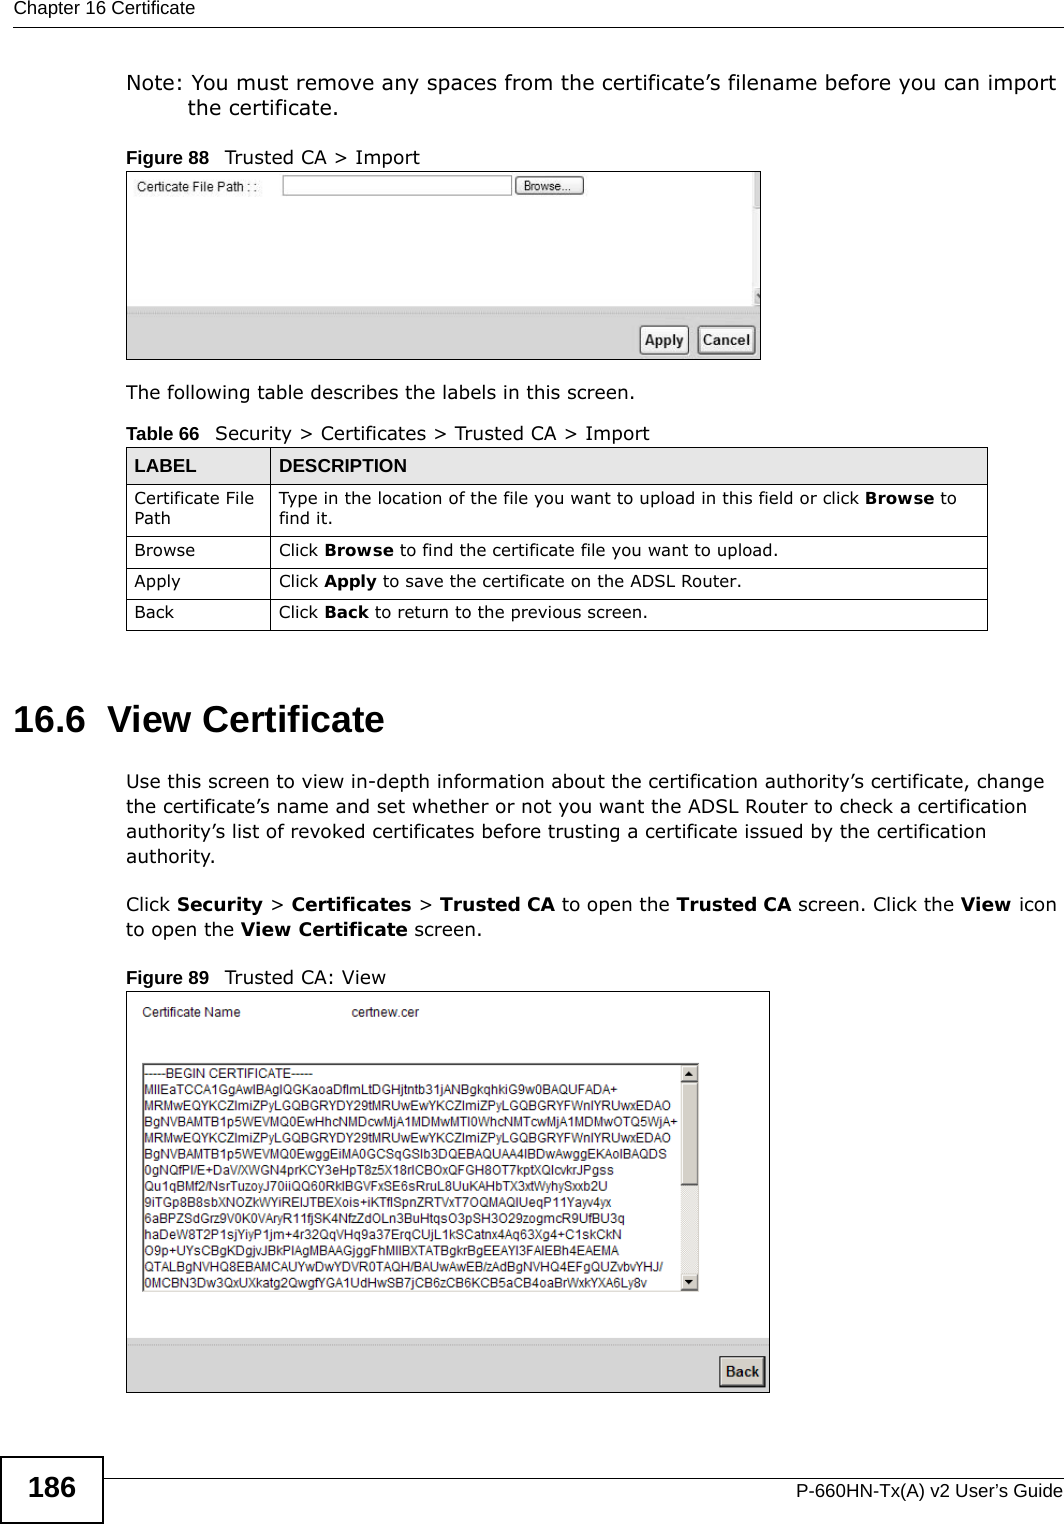 Chapter 16 CertificateP-660HN-Tx(A) v2 User’s Guide186Note: You must remove any spaces from the certificate’s filename before you can import the certificate.Figure 88   Trusted CA &gt; ImportThe following table describes the labels in this screen.16.6  View Certificate Use this screen to view in-depth information about the certification authority’s certificate, change the certificate’s name and set whether or not you want the ADSL Router to check a certification authority’s list of revoked certificates before trusting a certificate issued by the certification authority.Click Security &gt; Certificates &gt; Trusted CA to open the Trusted CA screen. Click the View icon to open the View Certificate screen. Figure 89   Trusted CA: ViewTable 66   Security &gt; Certificates &gt; Trusted CA &gt; ImportLABEL DESCRIPTIONCertificate File Path Type in the location of the file you want to upload in this field or click Browse to find it.Browse Click Browse to find the certificate file you want to upload. Apply Click Apply to save the certificate on the ADSL Router.Back Click Back to return to the previous screen.